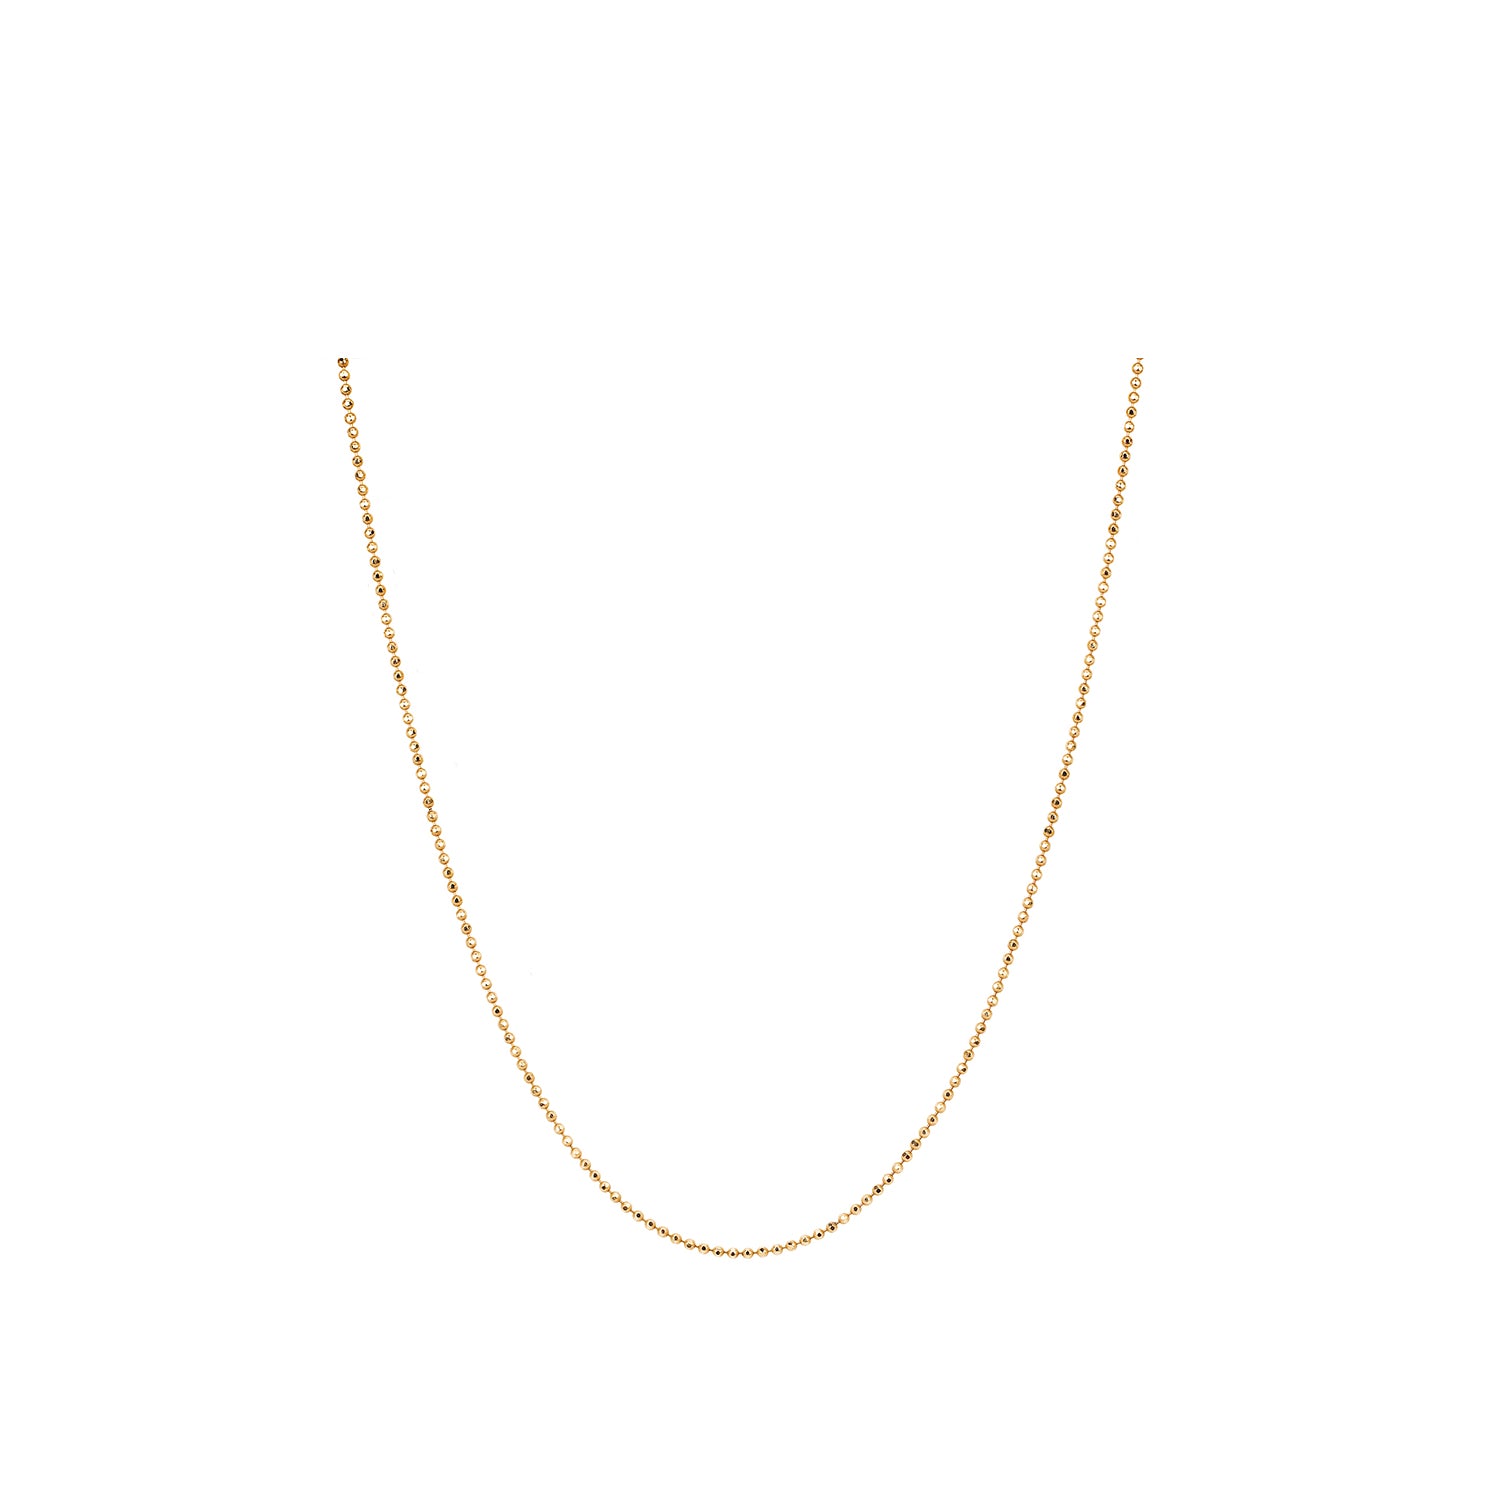 Gold Faceted Ball Chain in 14k rose gold